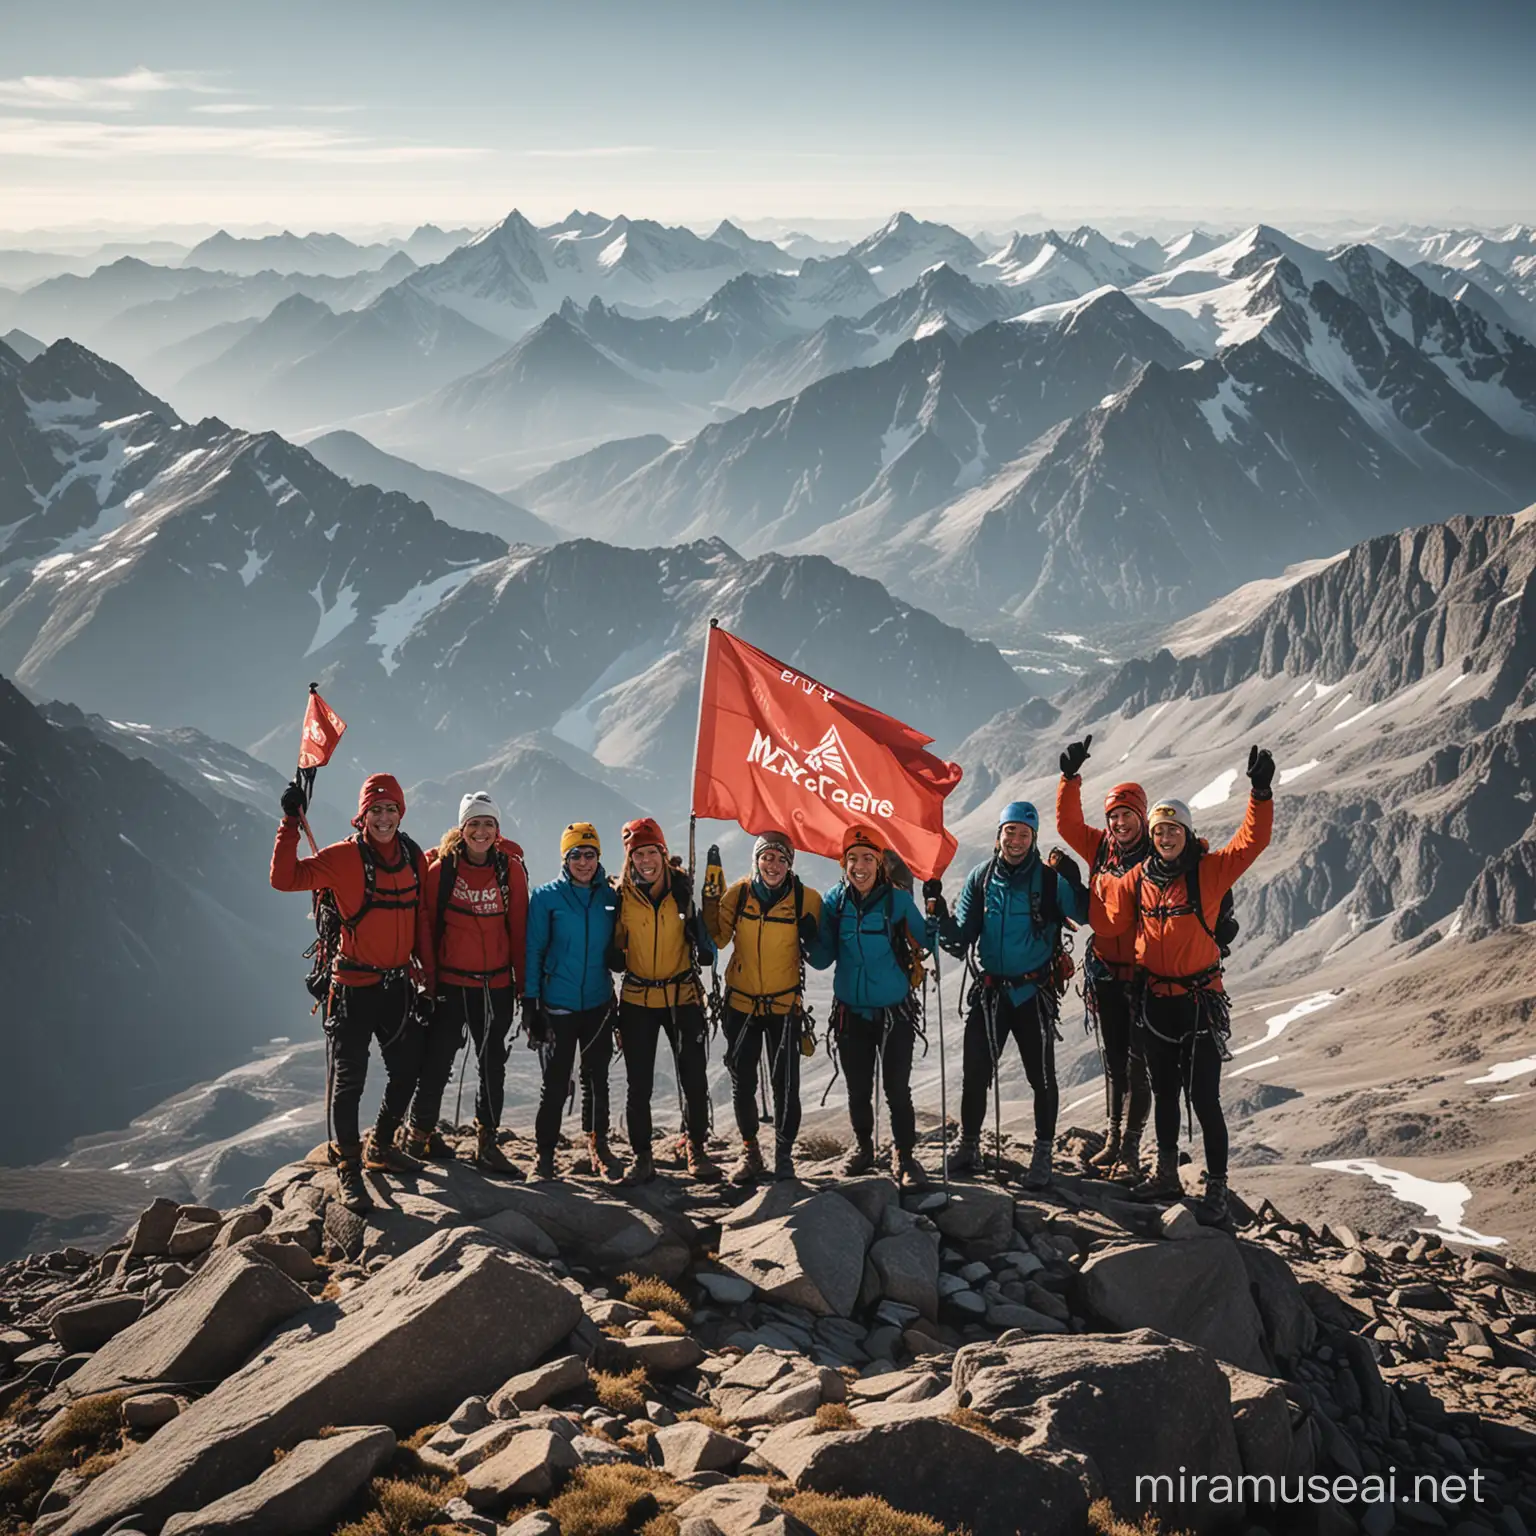 A team of climbers, 3 men and 3 women, huddled together, celebrating atop a summit, holding a flag on which we can read clearly "MXevolve SO"